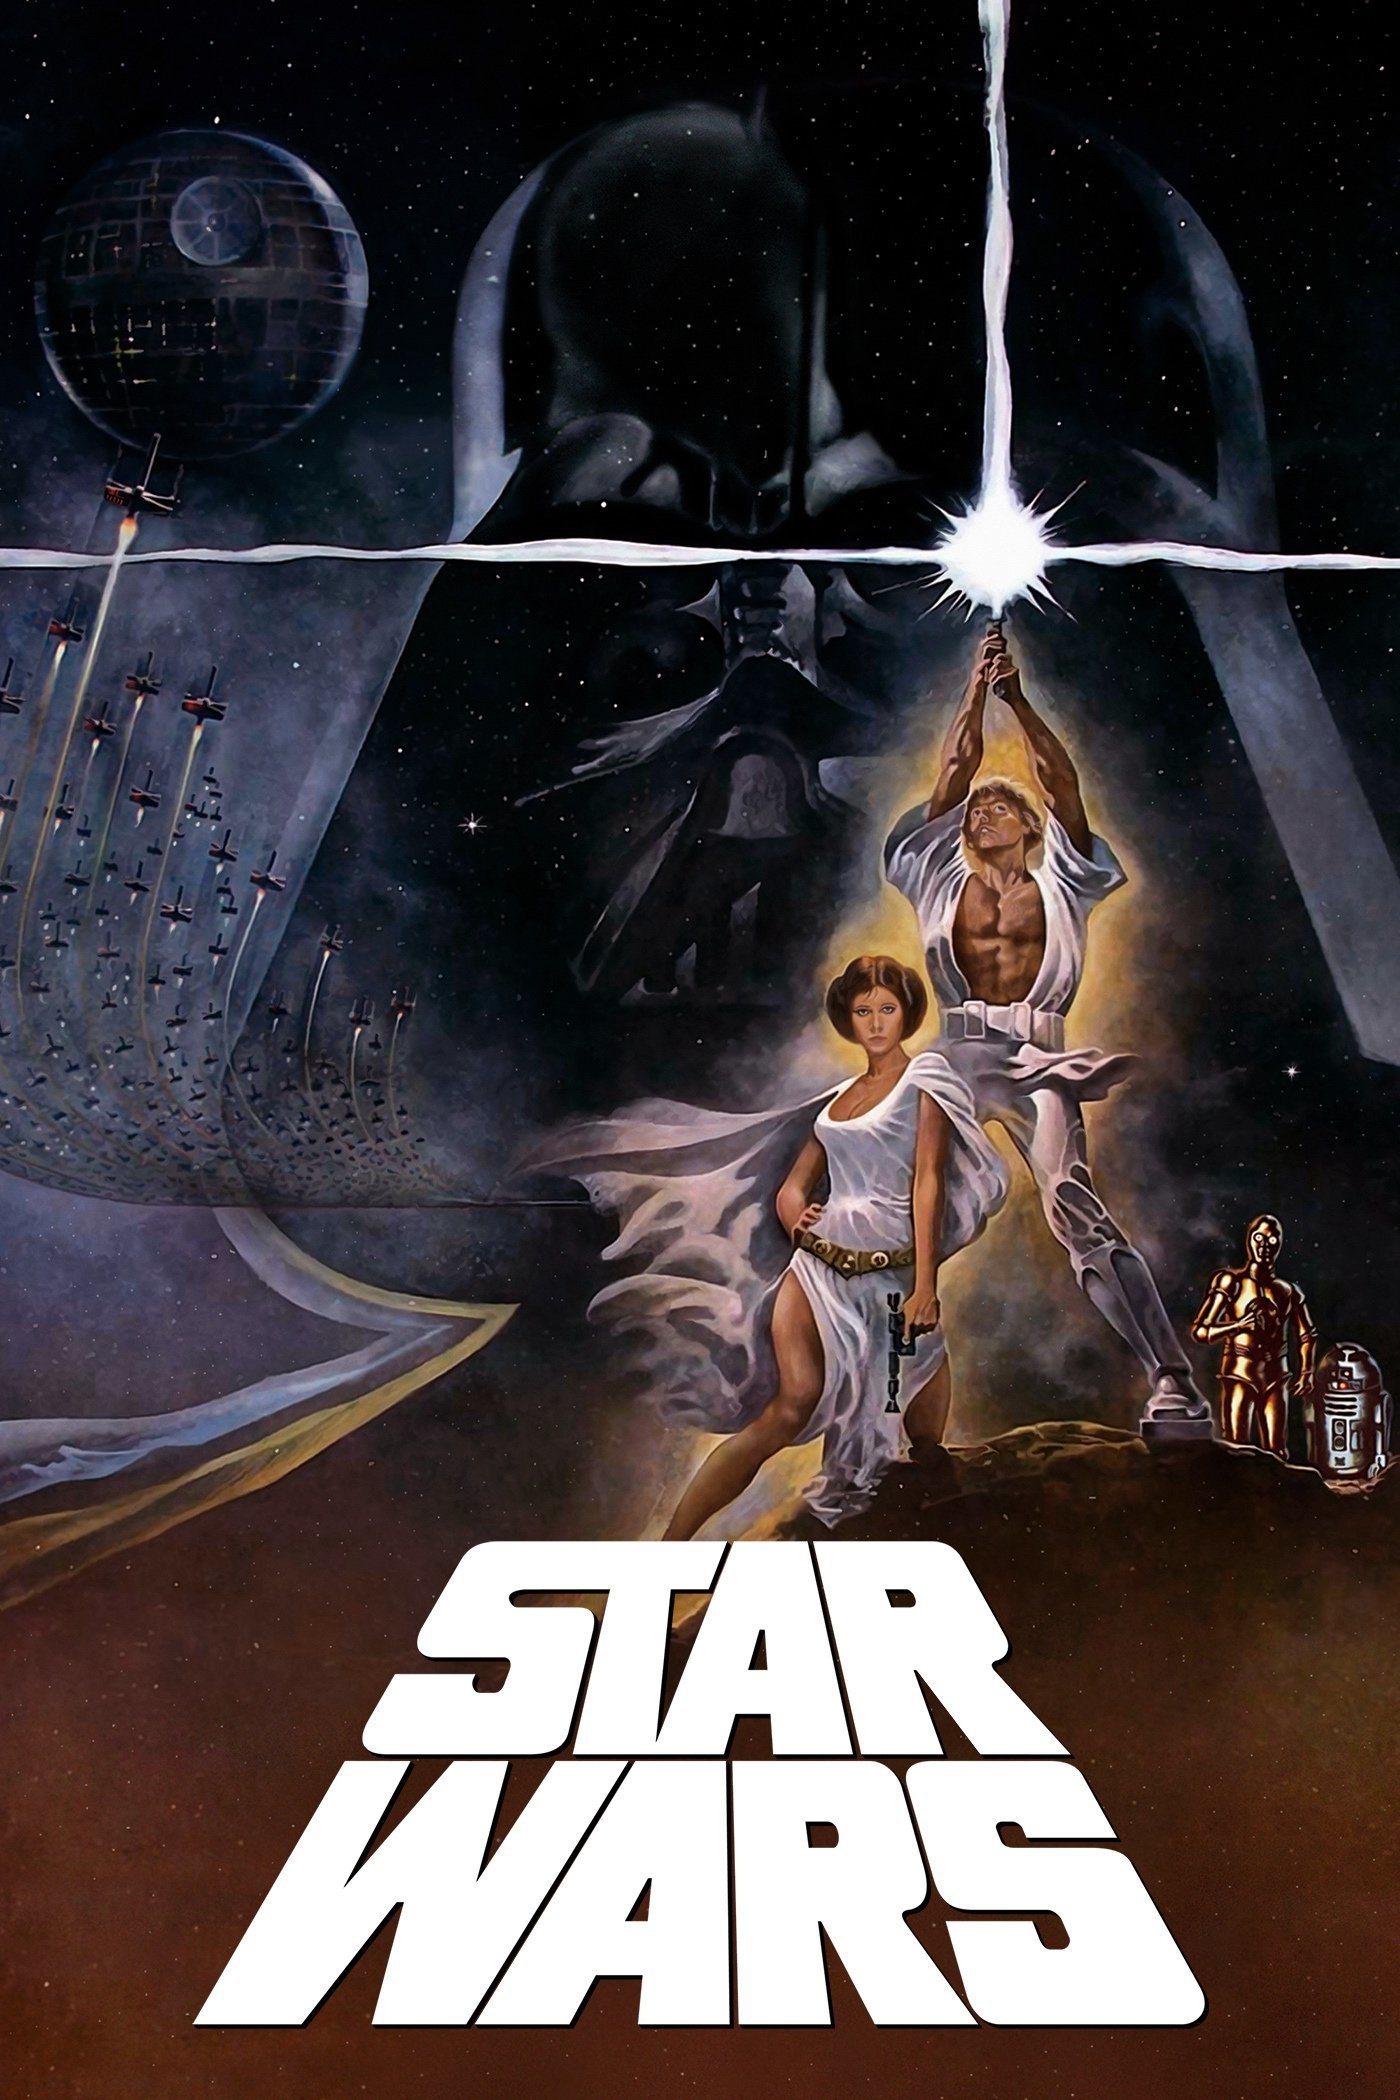 Star Wars Movie Poster - ID: 190986 - Image Abyss